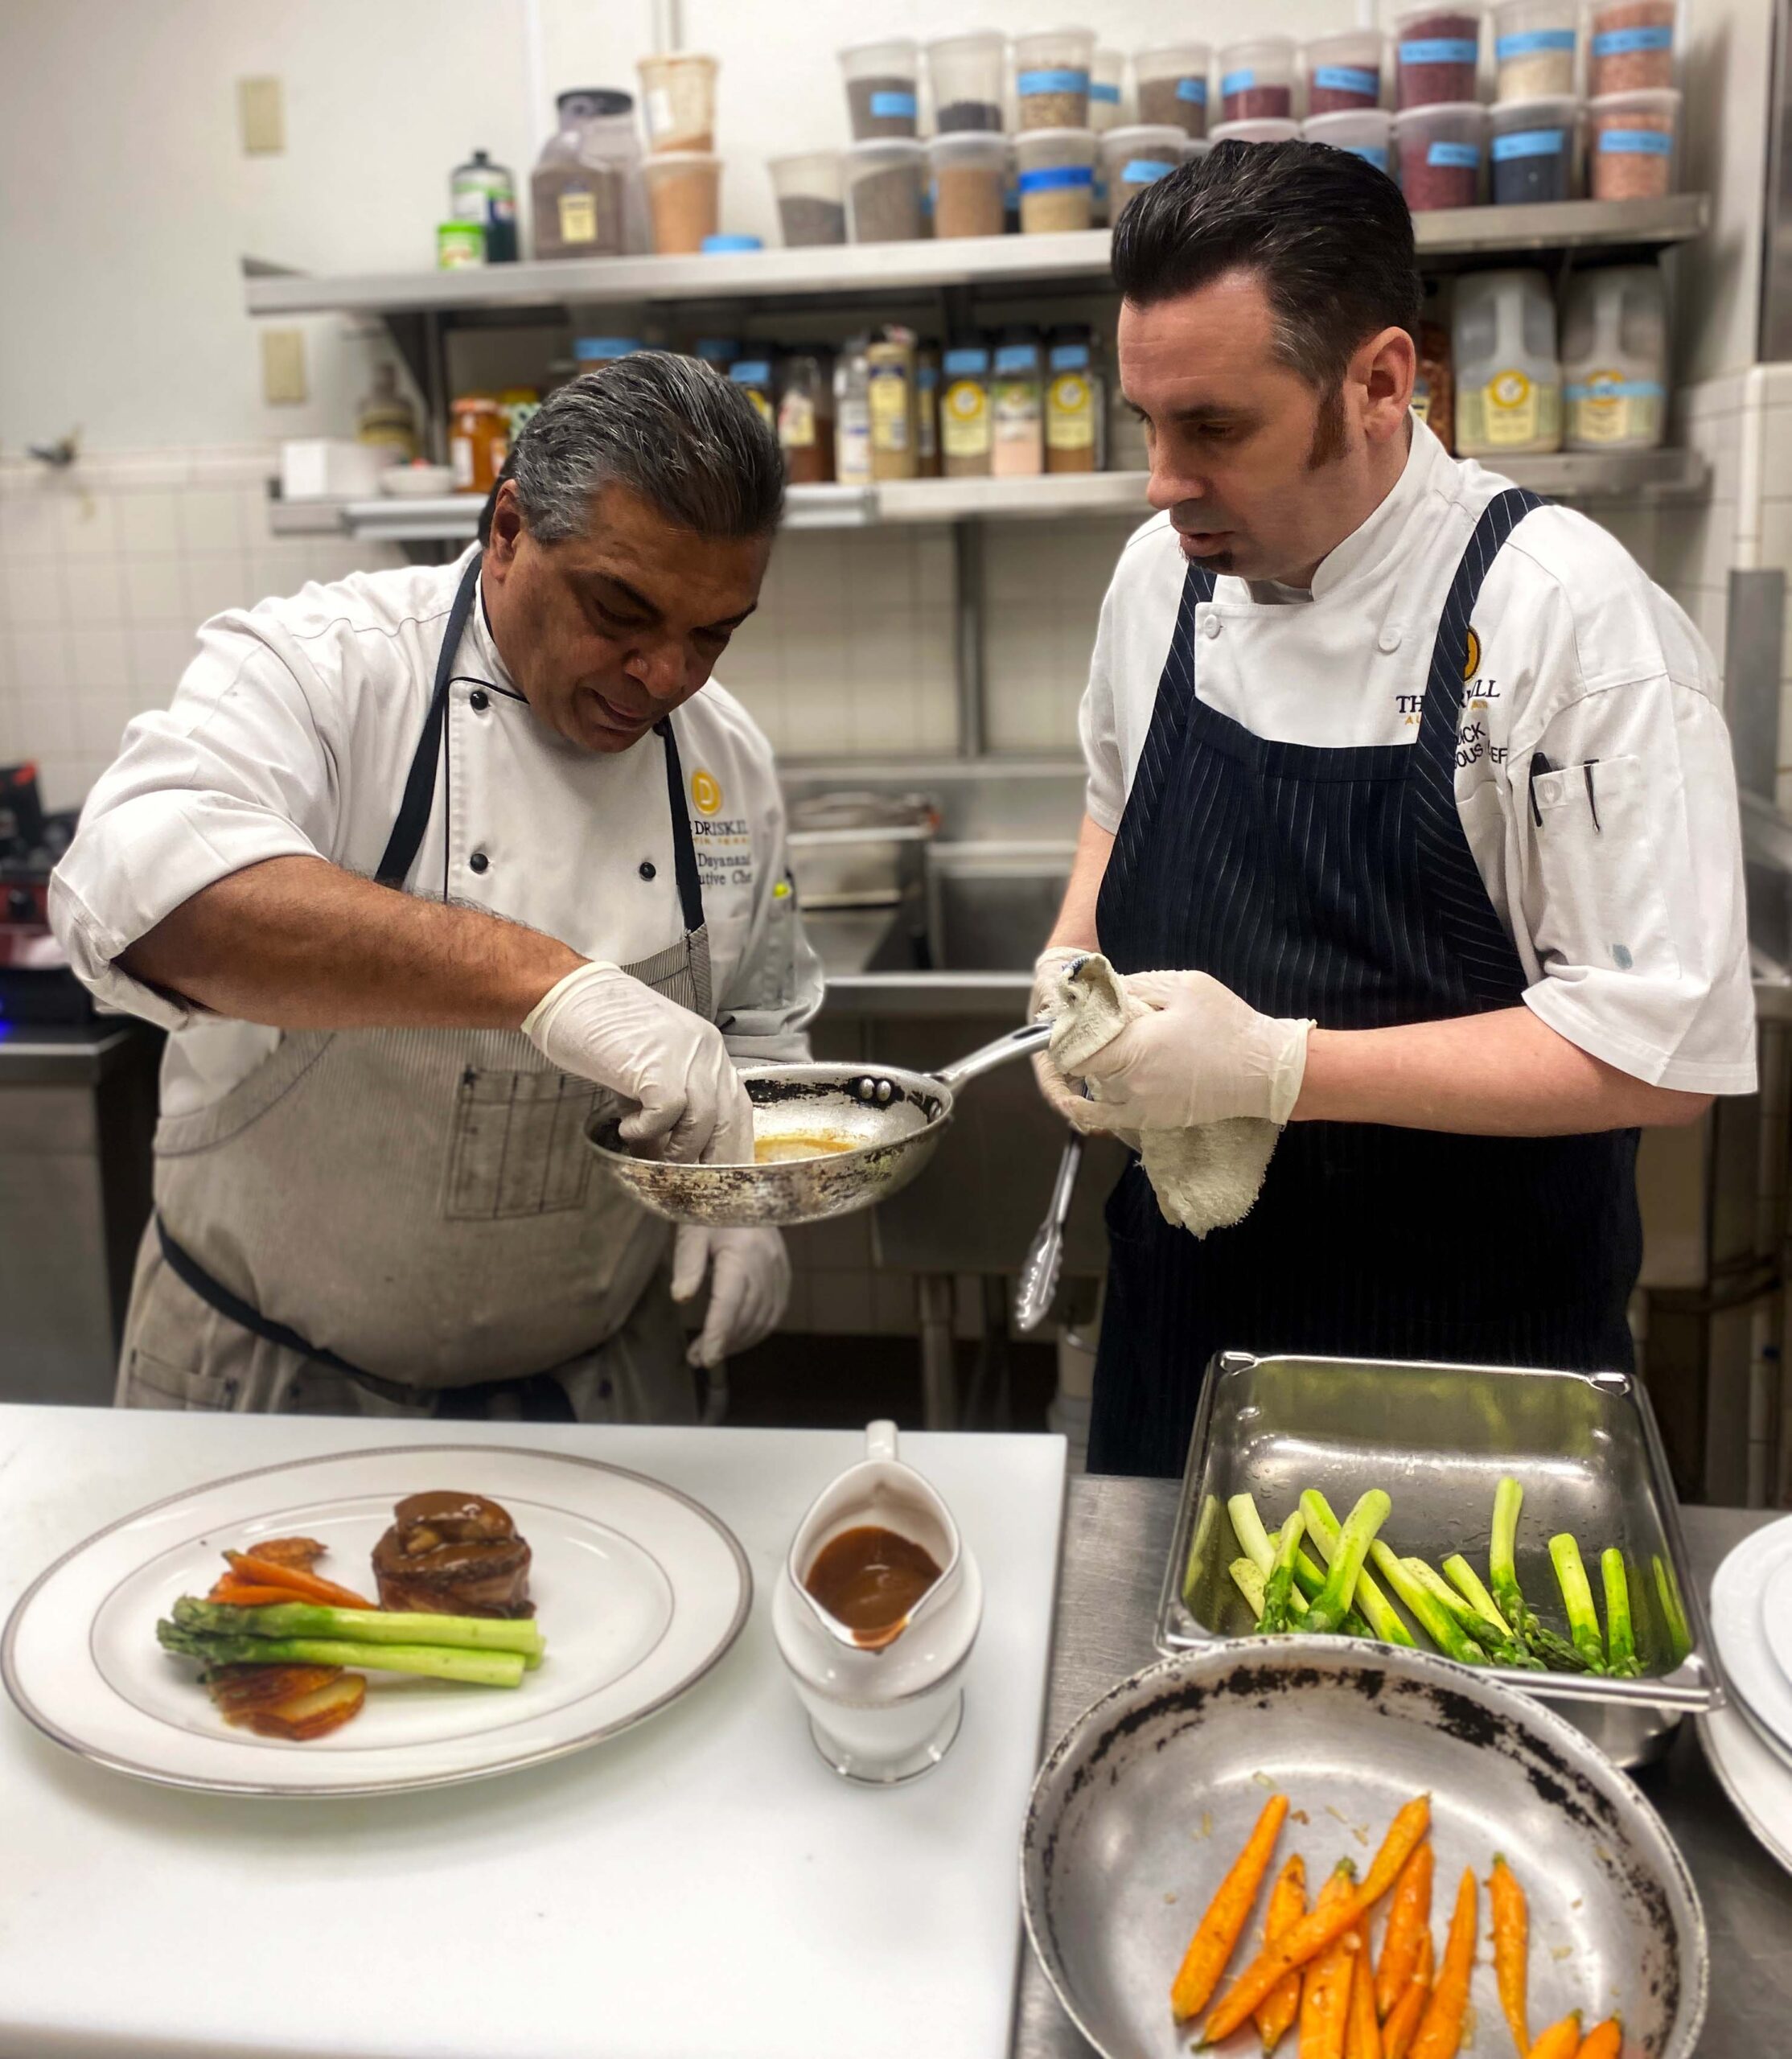 Chef Mark Dayanandan and Sous Chef Iain Reddick work together in the kitchen